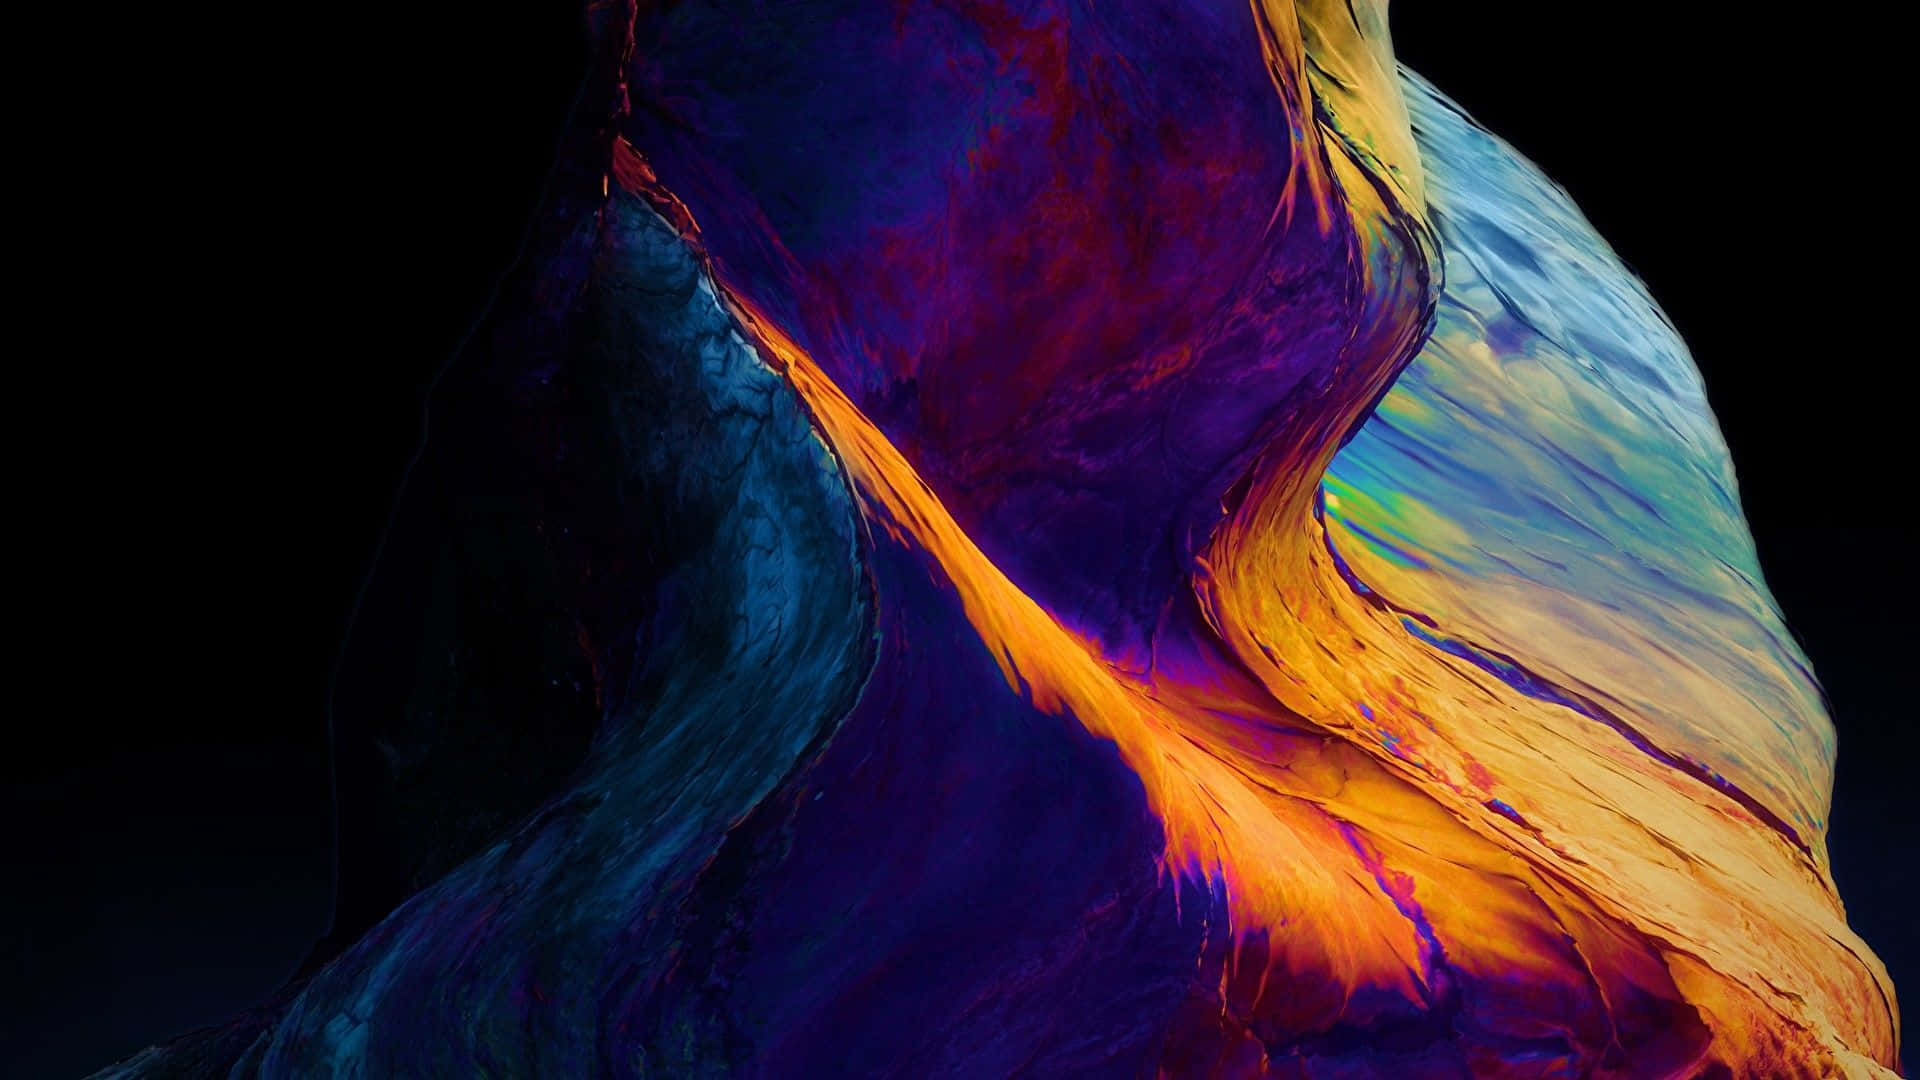 A Colorful Abstract Painting Of A Rock Background